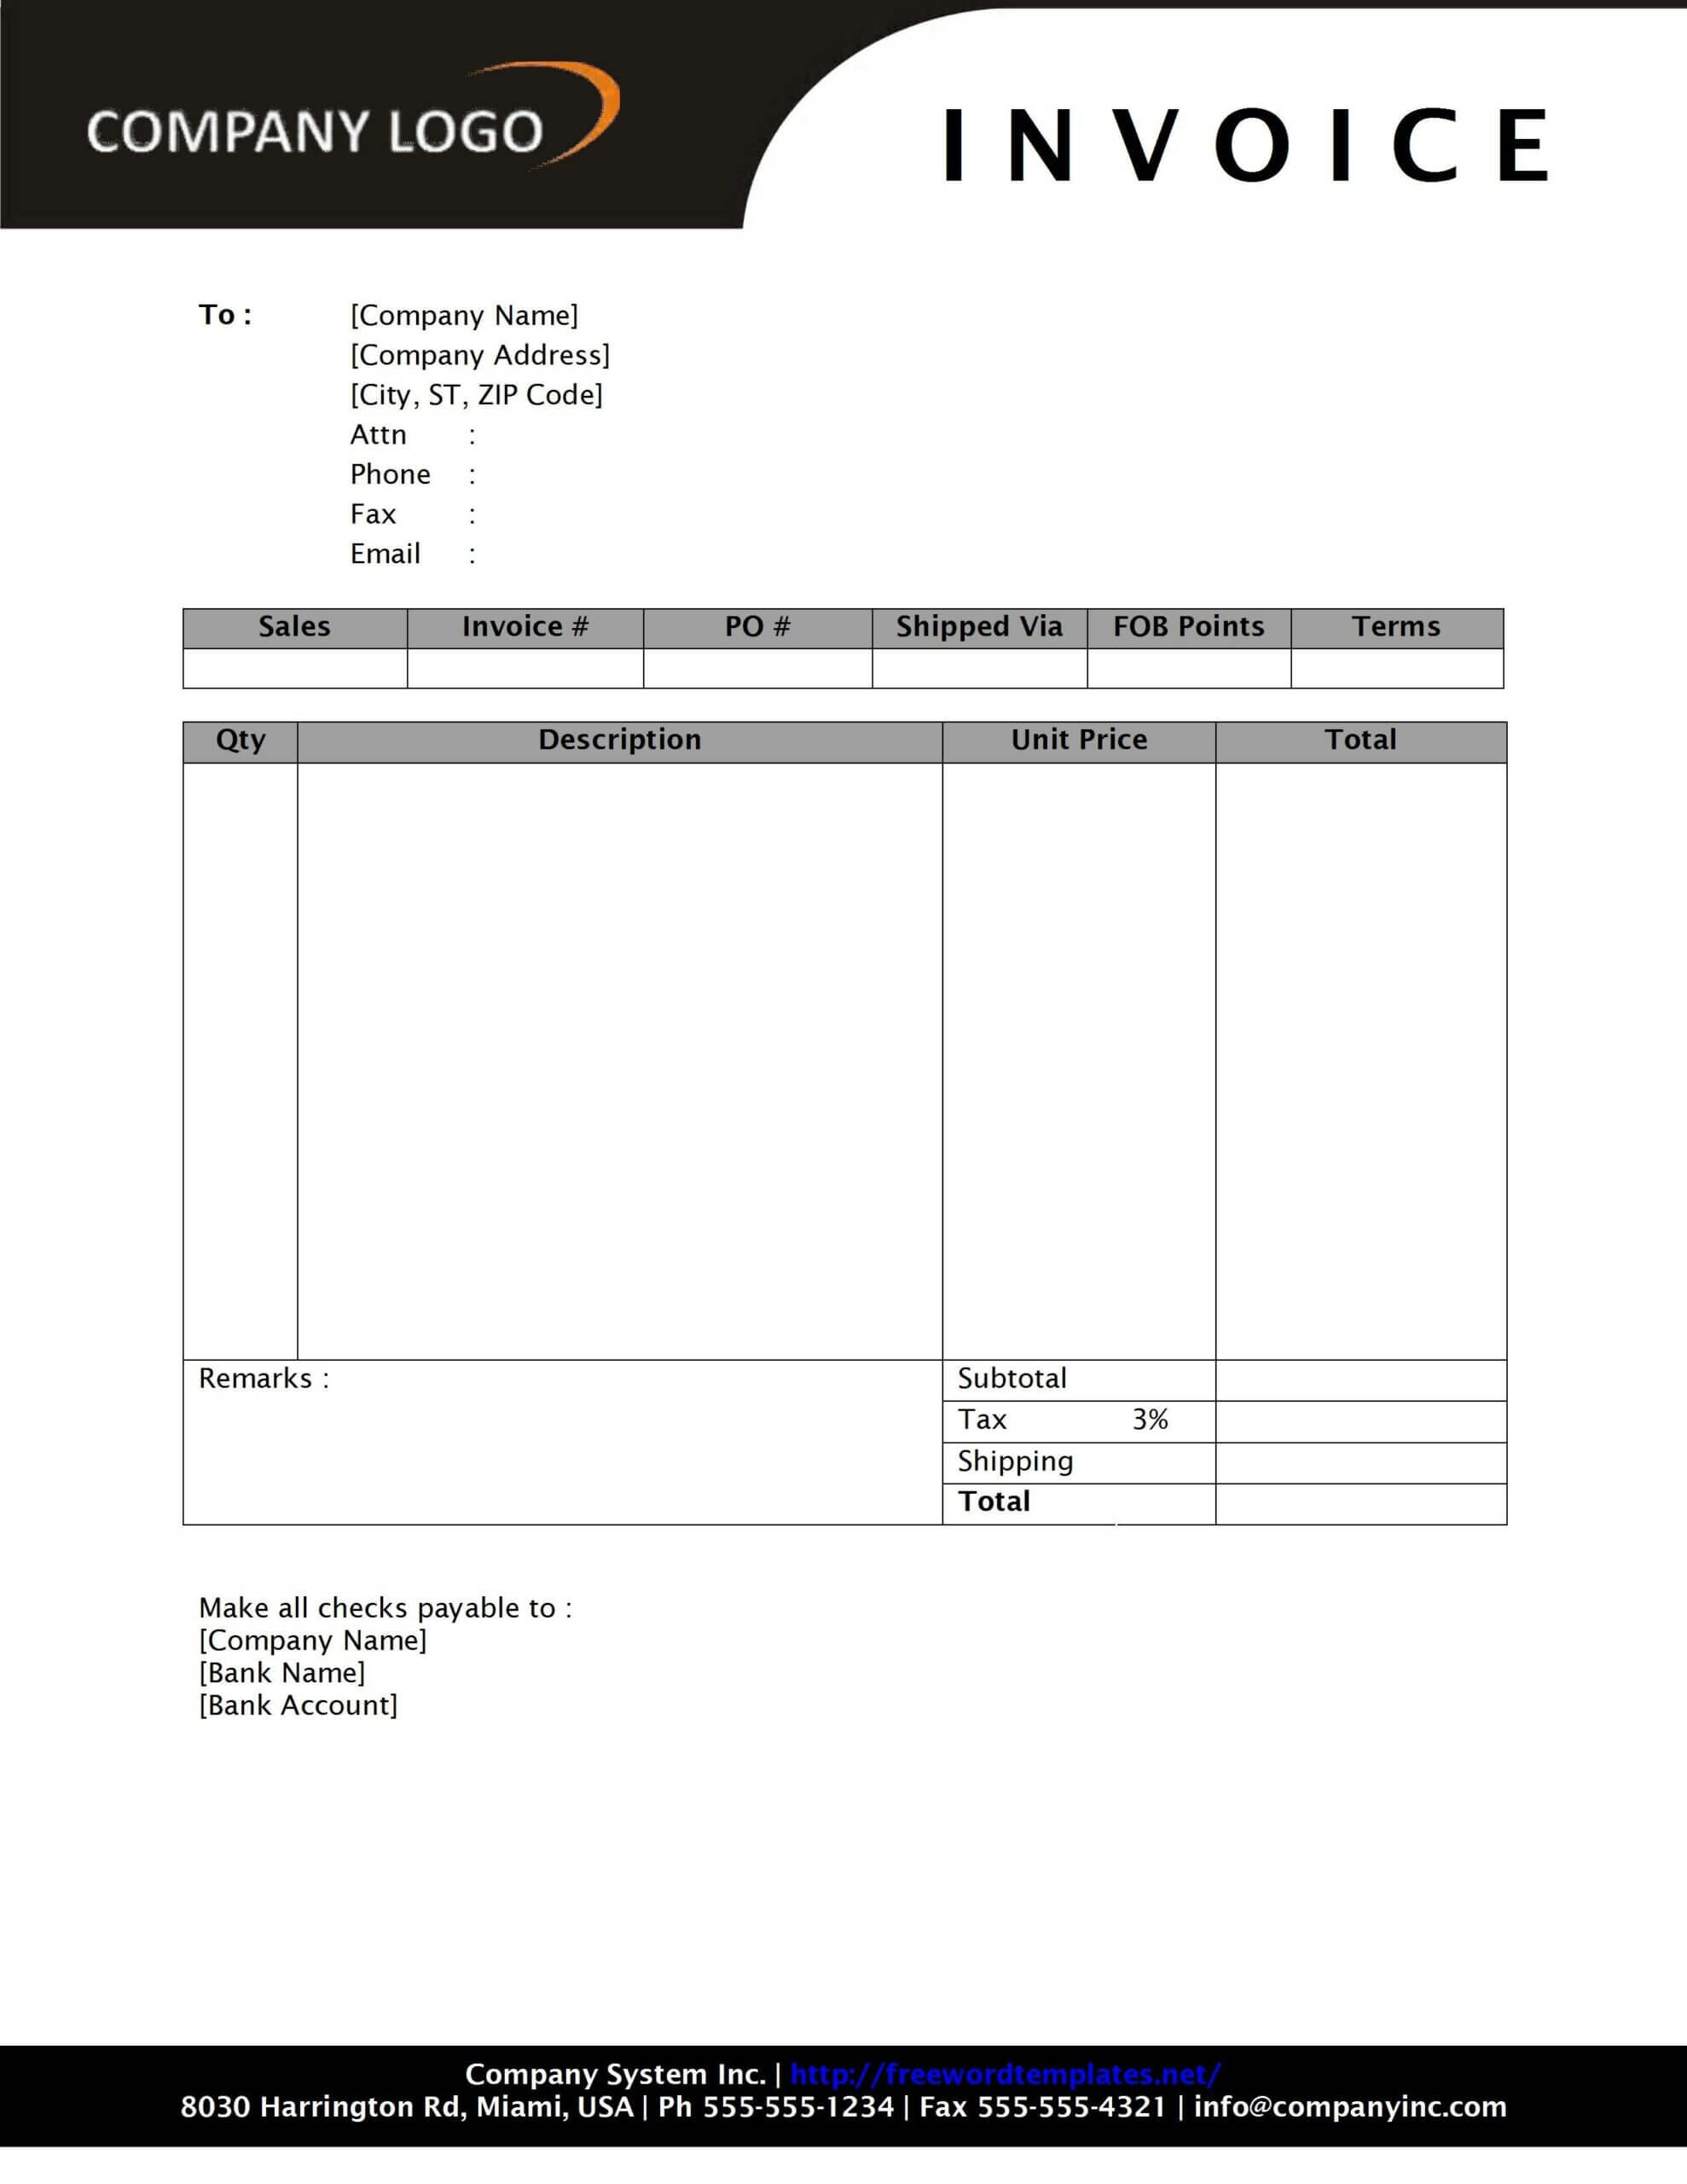 Free Invoice Template Downloads Invoice Template Free 2016 In Free Downloadable Invoice Template For Word